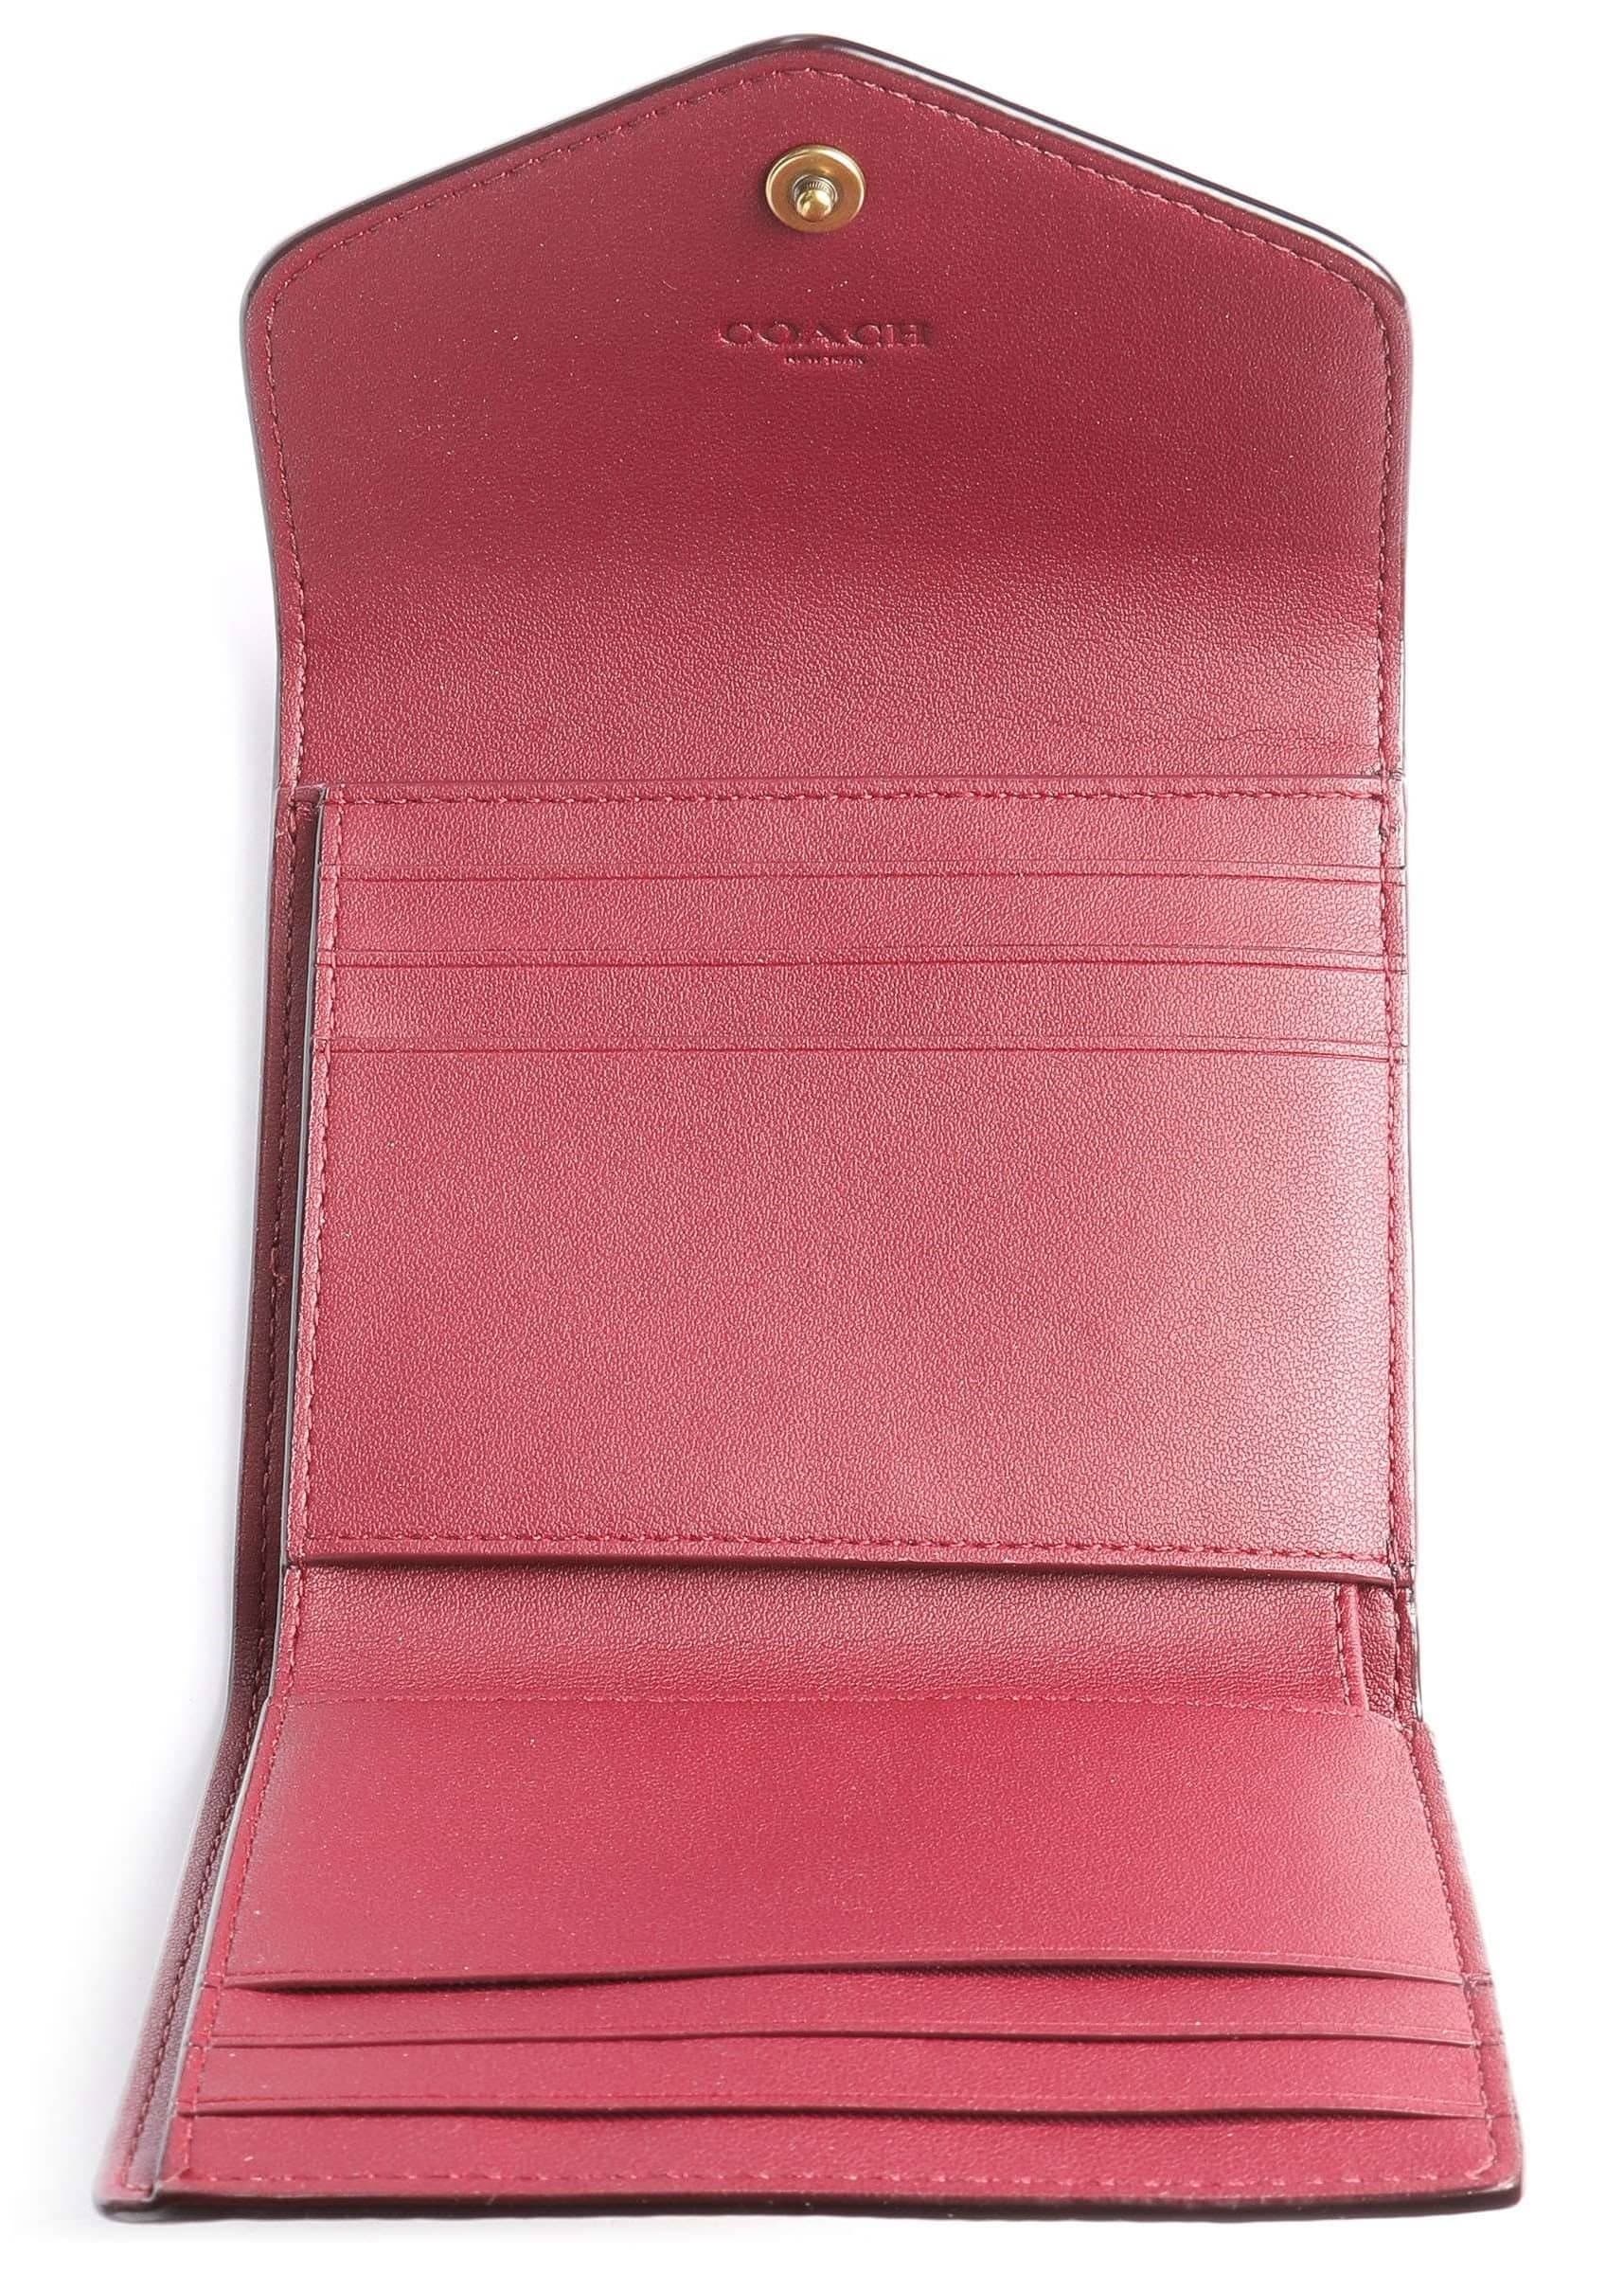 VÍ NỮ NGẮN NẤP GẬP COACH WYN SMALL WALLET IN COLORBLOCK SIGNATURE CANVAS C2329 2